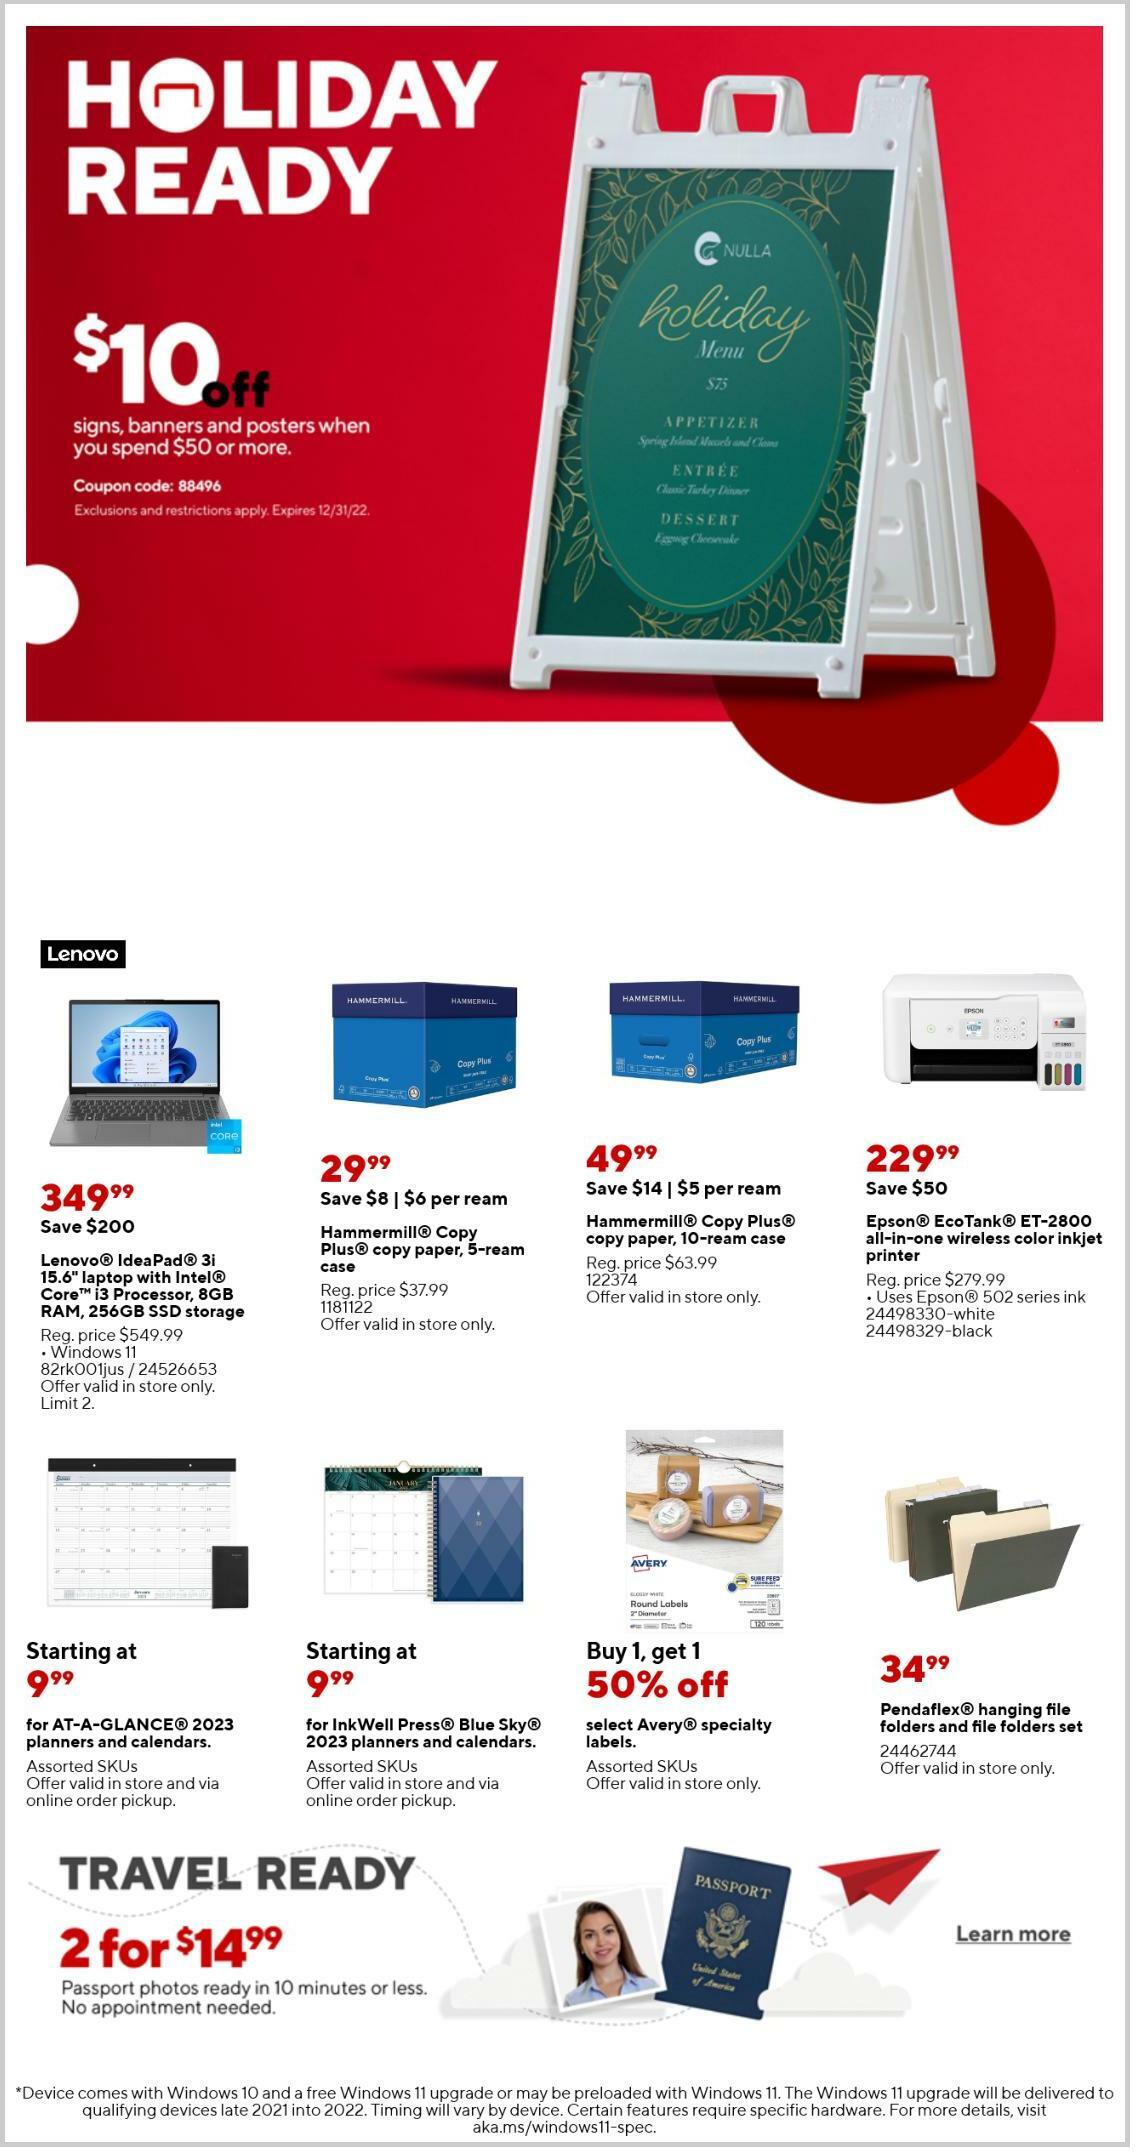 Staples Weekly Ad from December 11